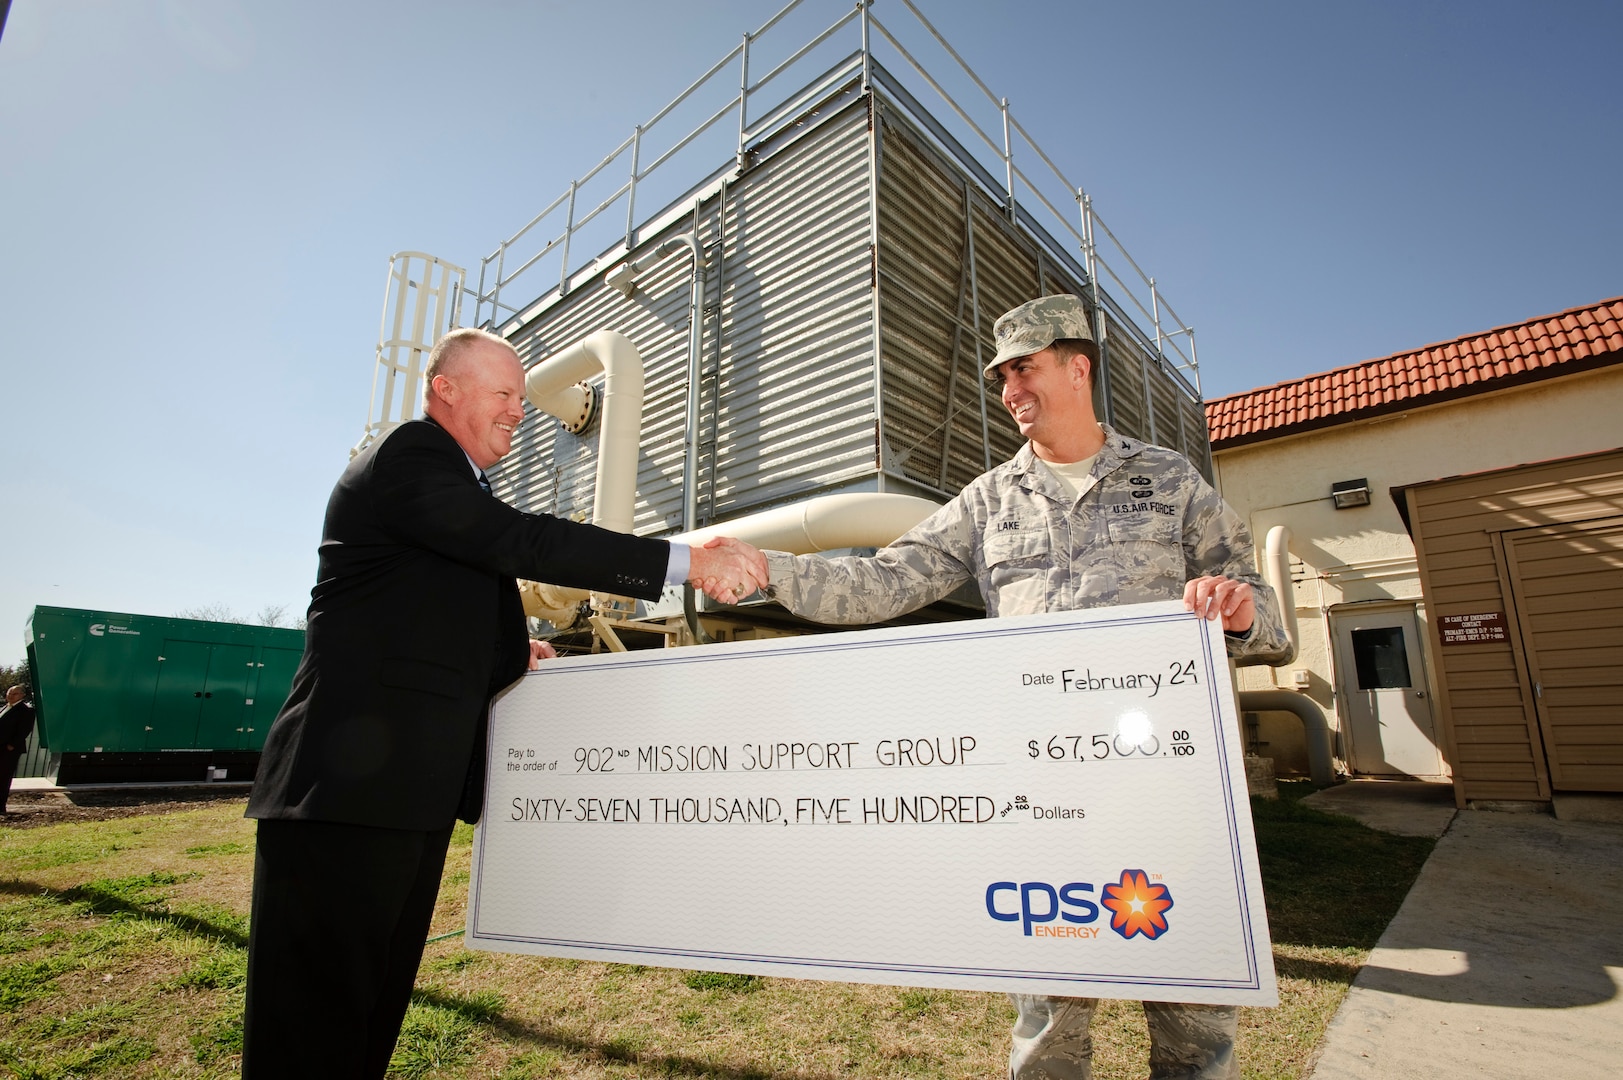 John barrow energy solutions manager for CPS Energy, presents Col. Alan Lake, 902nd Mission Support Group commander, with a check crediting the base utility account for energy savings in front of a newly installed water chilling unit, which will lead to the $67,500 savings in the next year of service. (U.S. Air Force photo/Steve Thurow)